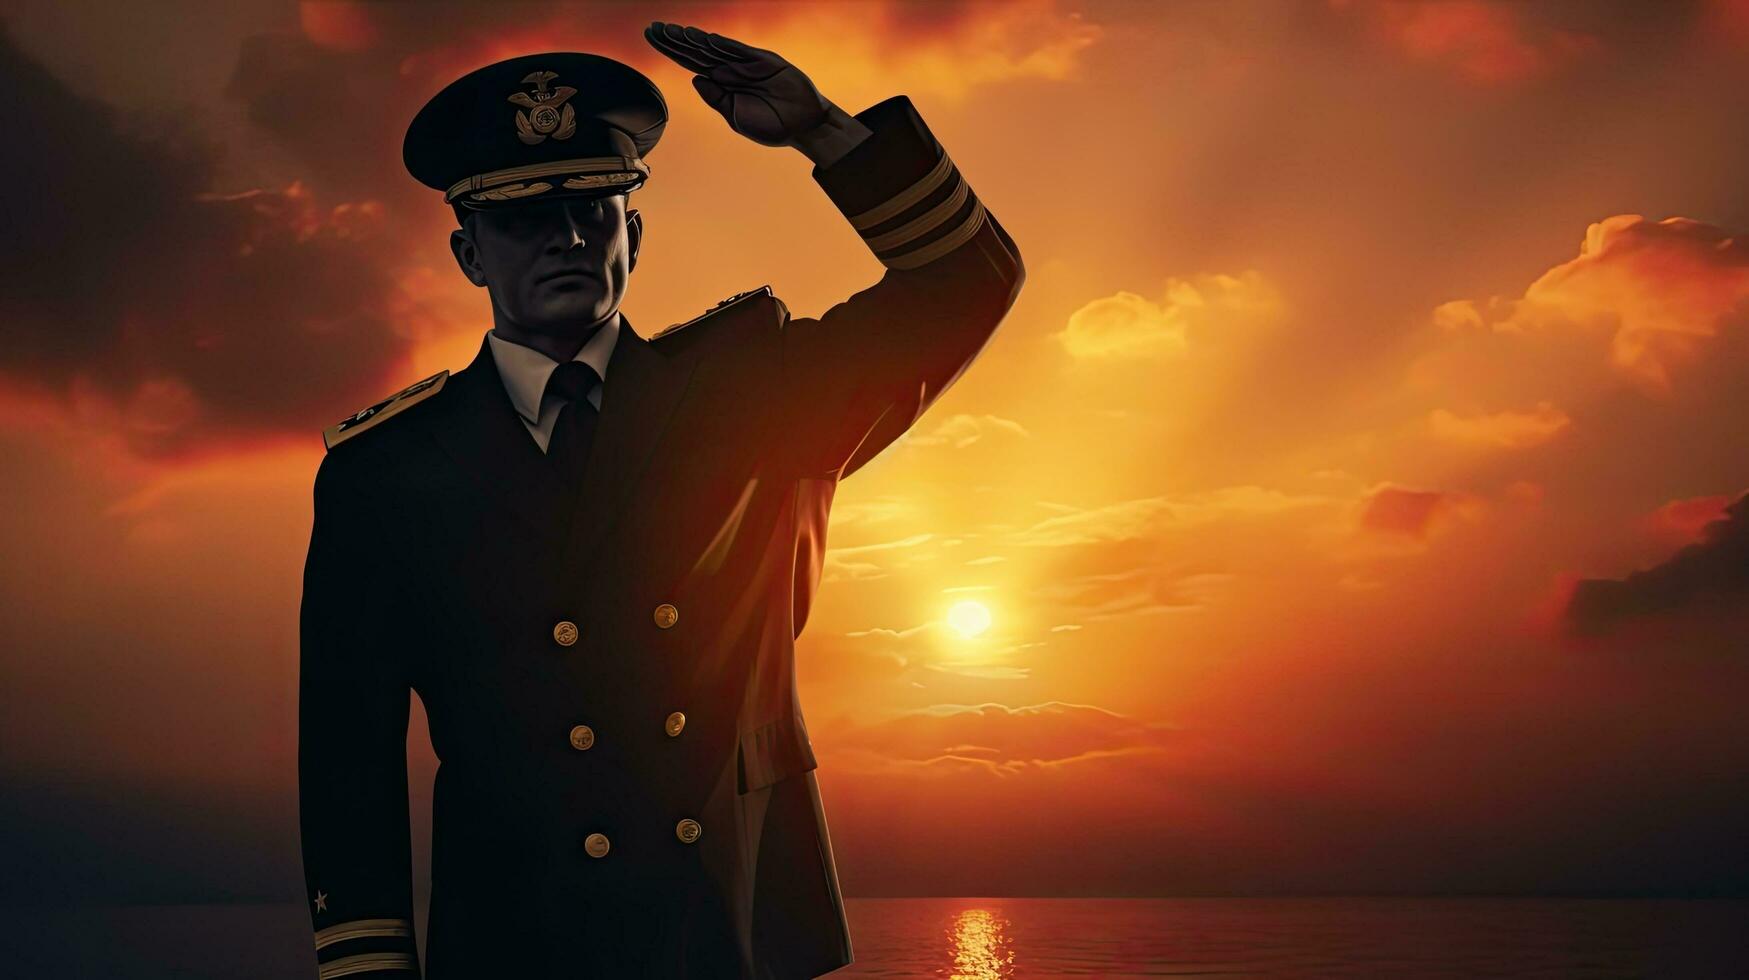 Captain silhouetted against sunset in a digital composite photo